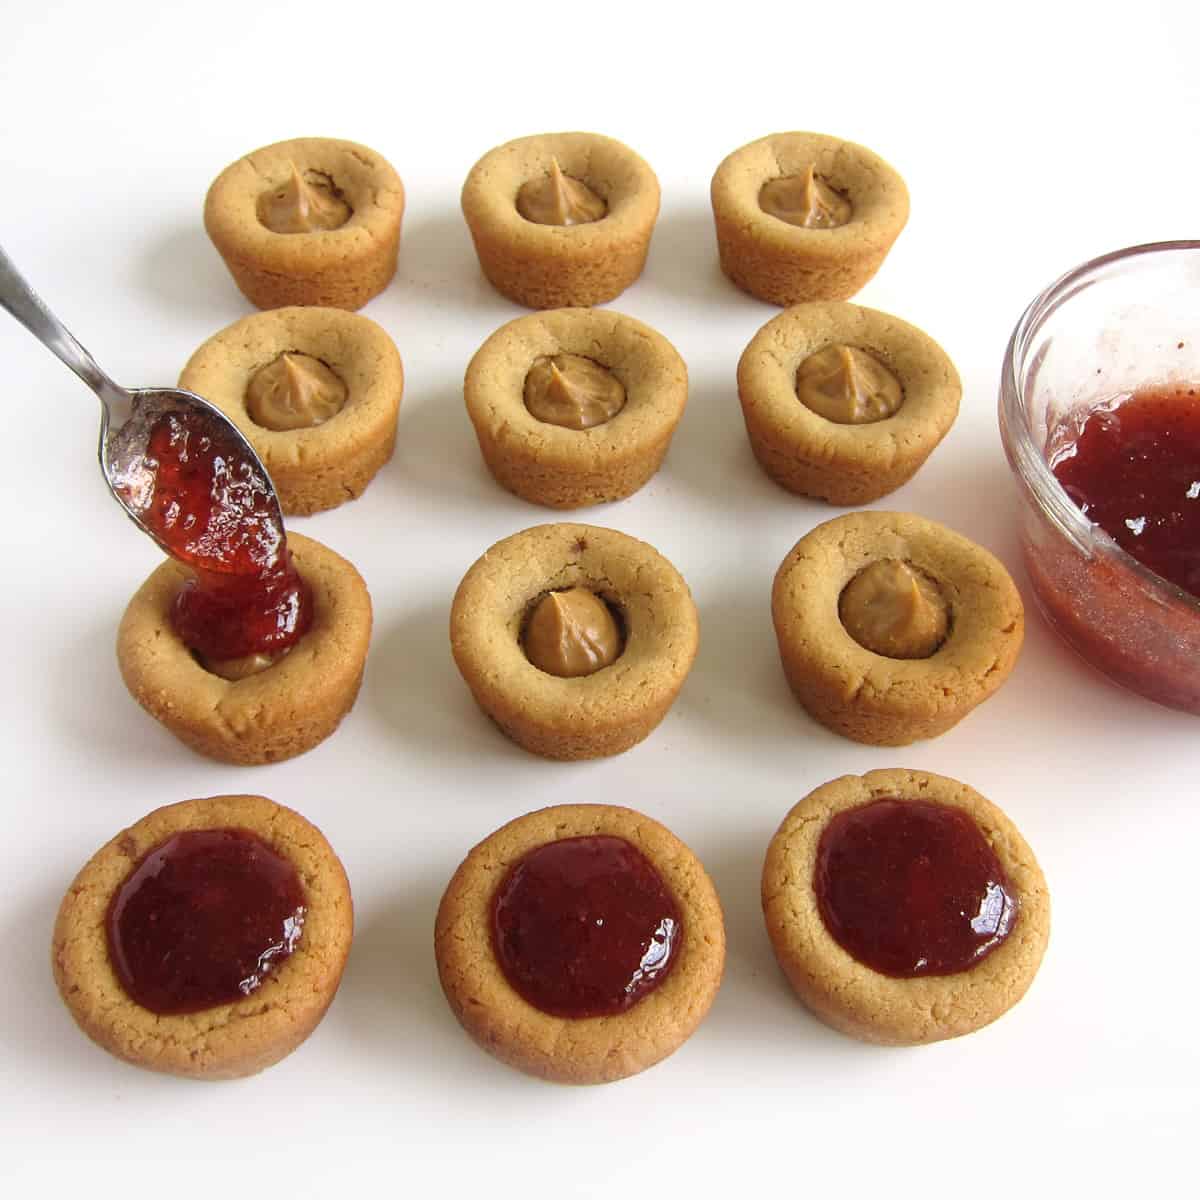 spooning strawberry jam over the peanut butter cookie cups filled with peanut butter